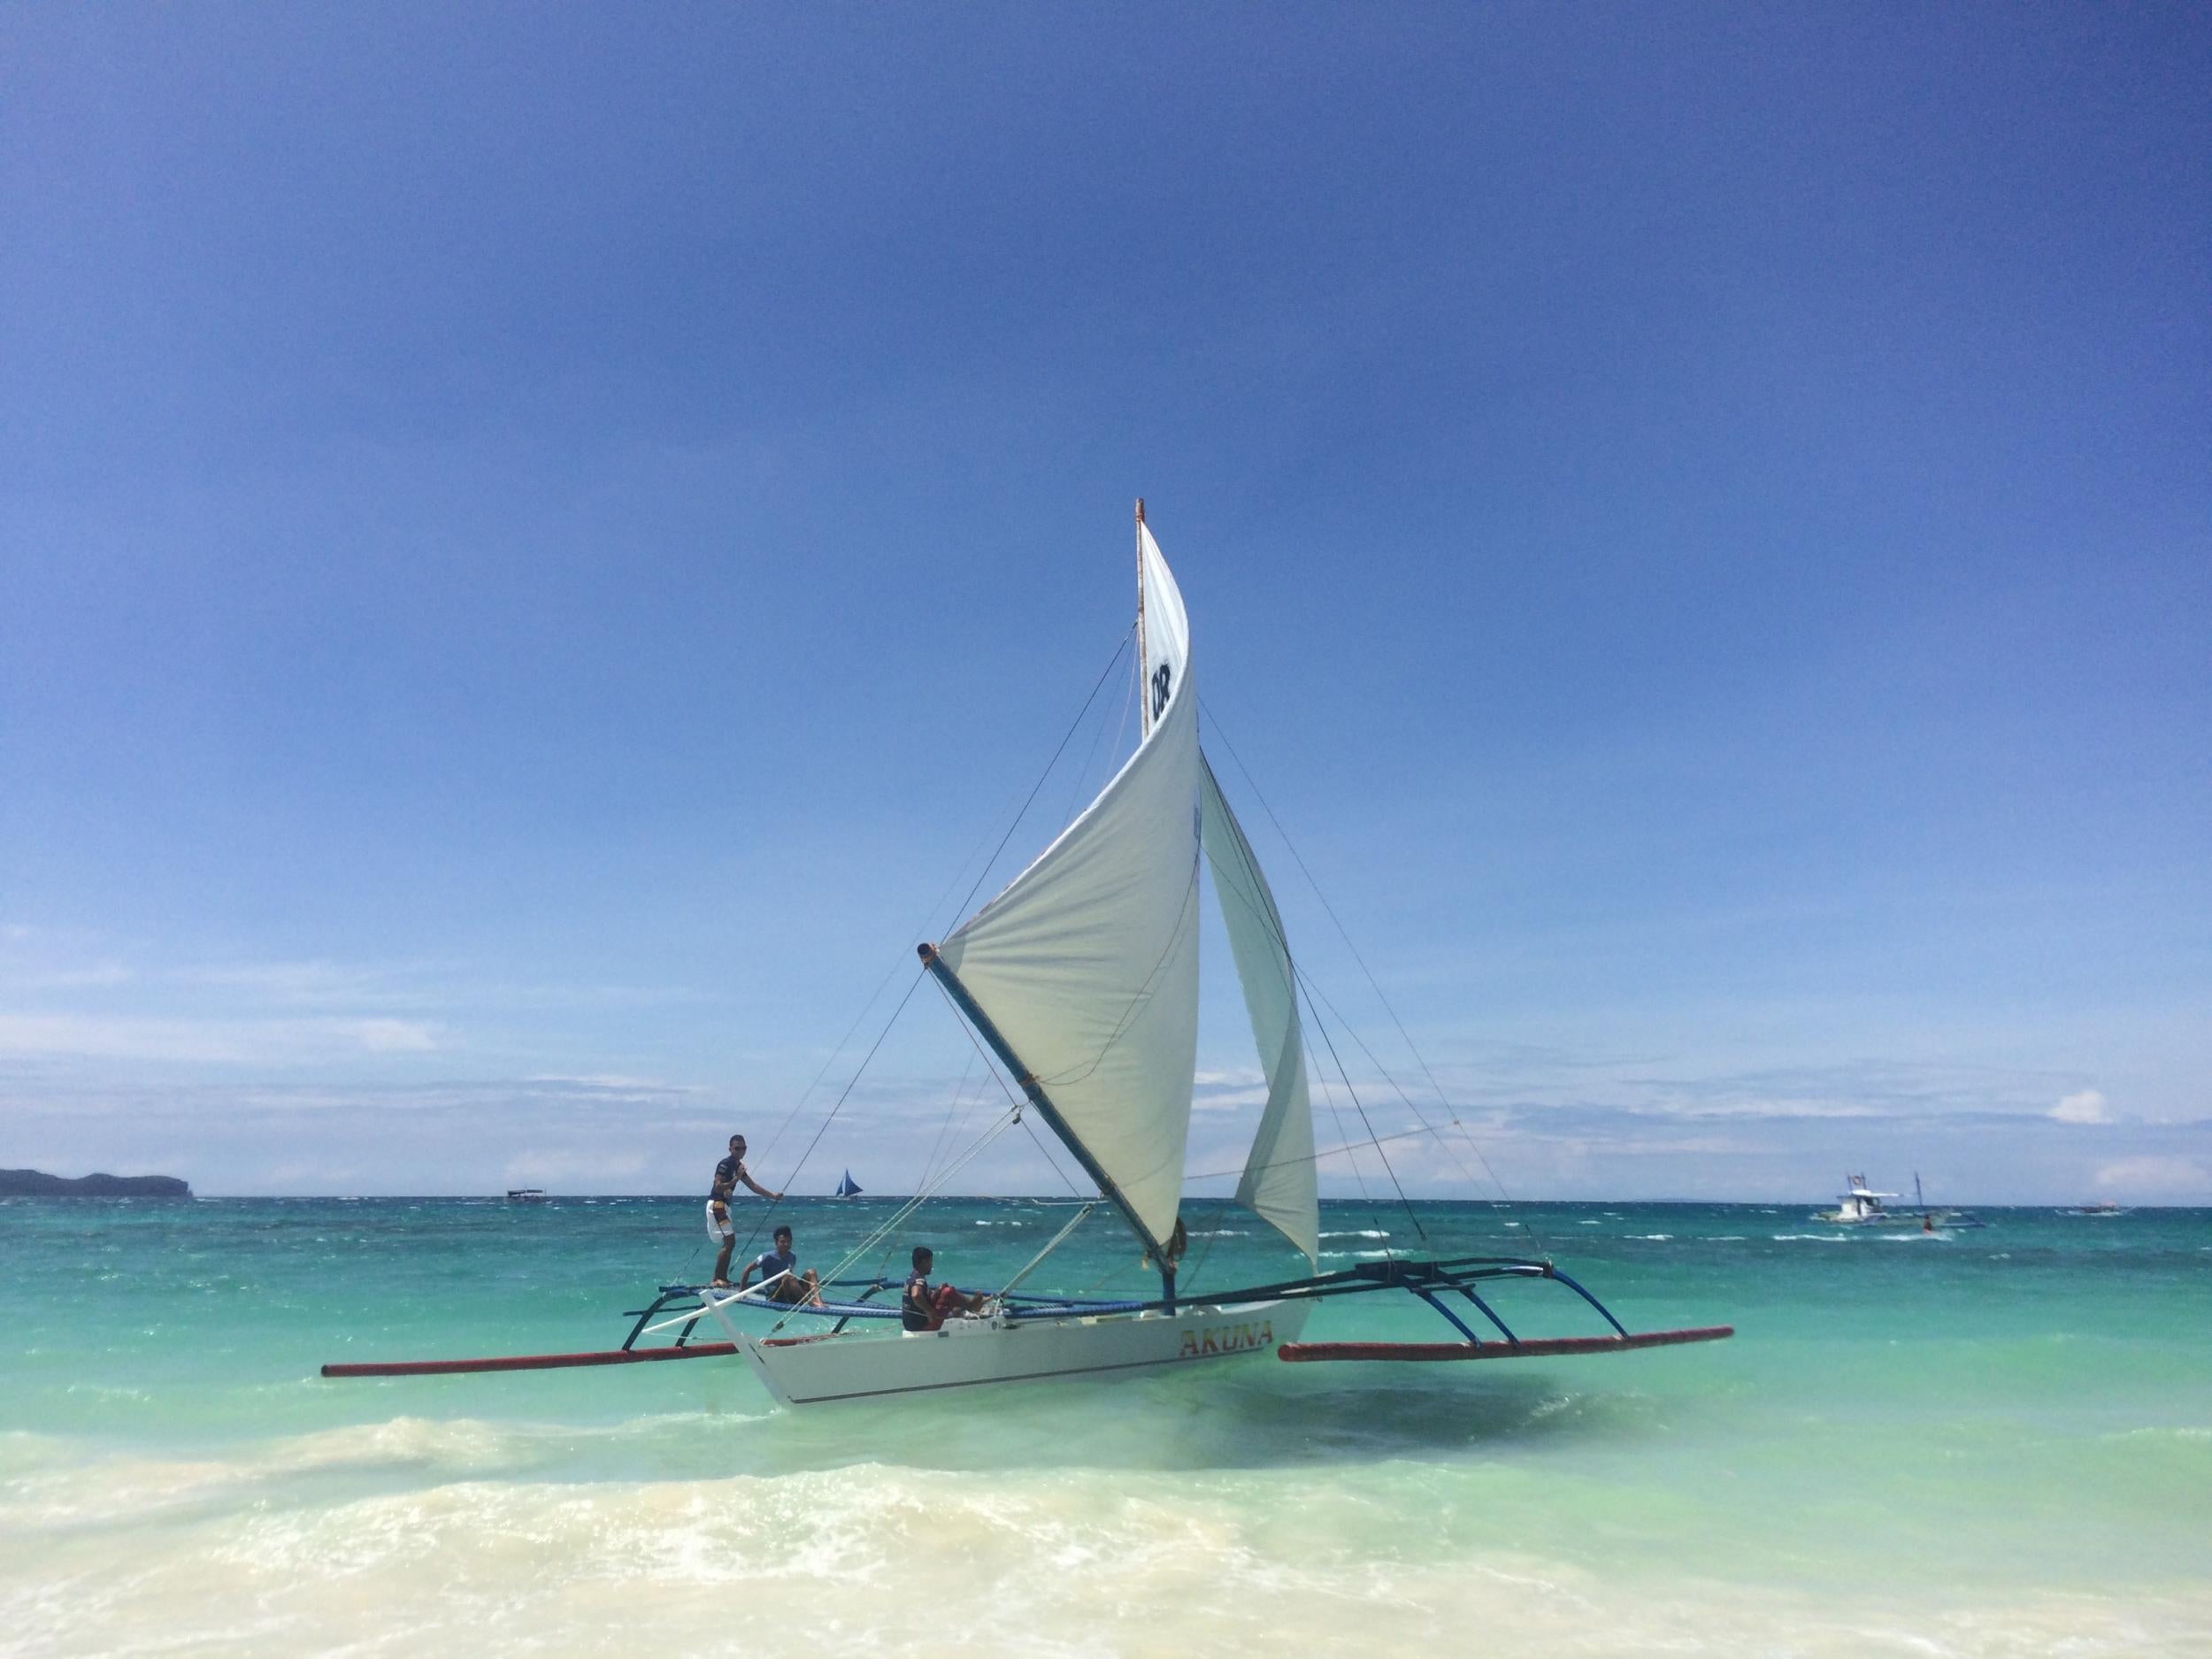 Race across turquoise seas in traditional paraw boats